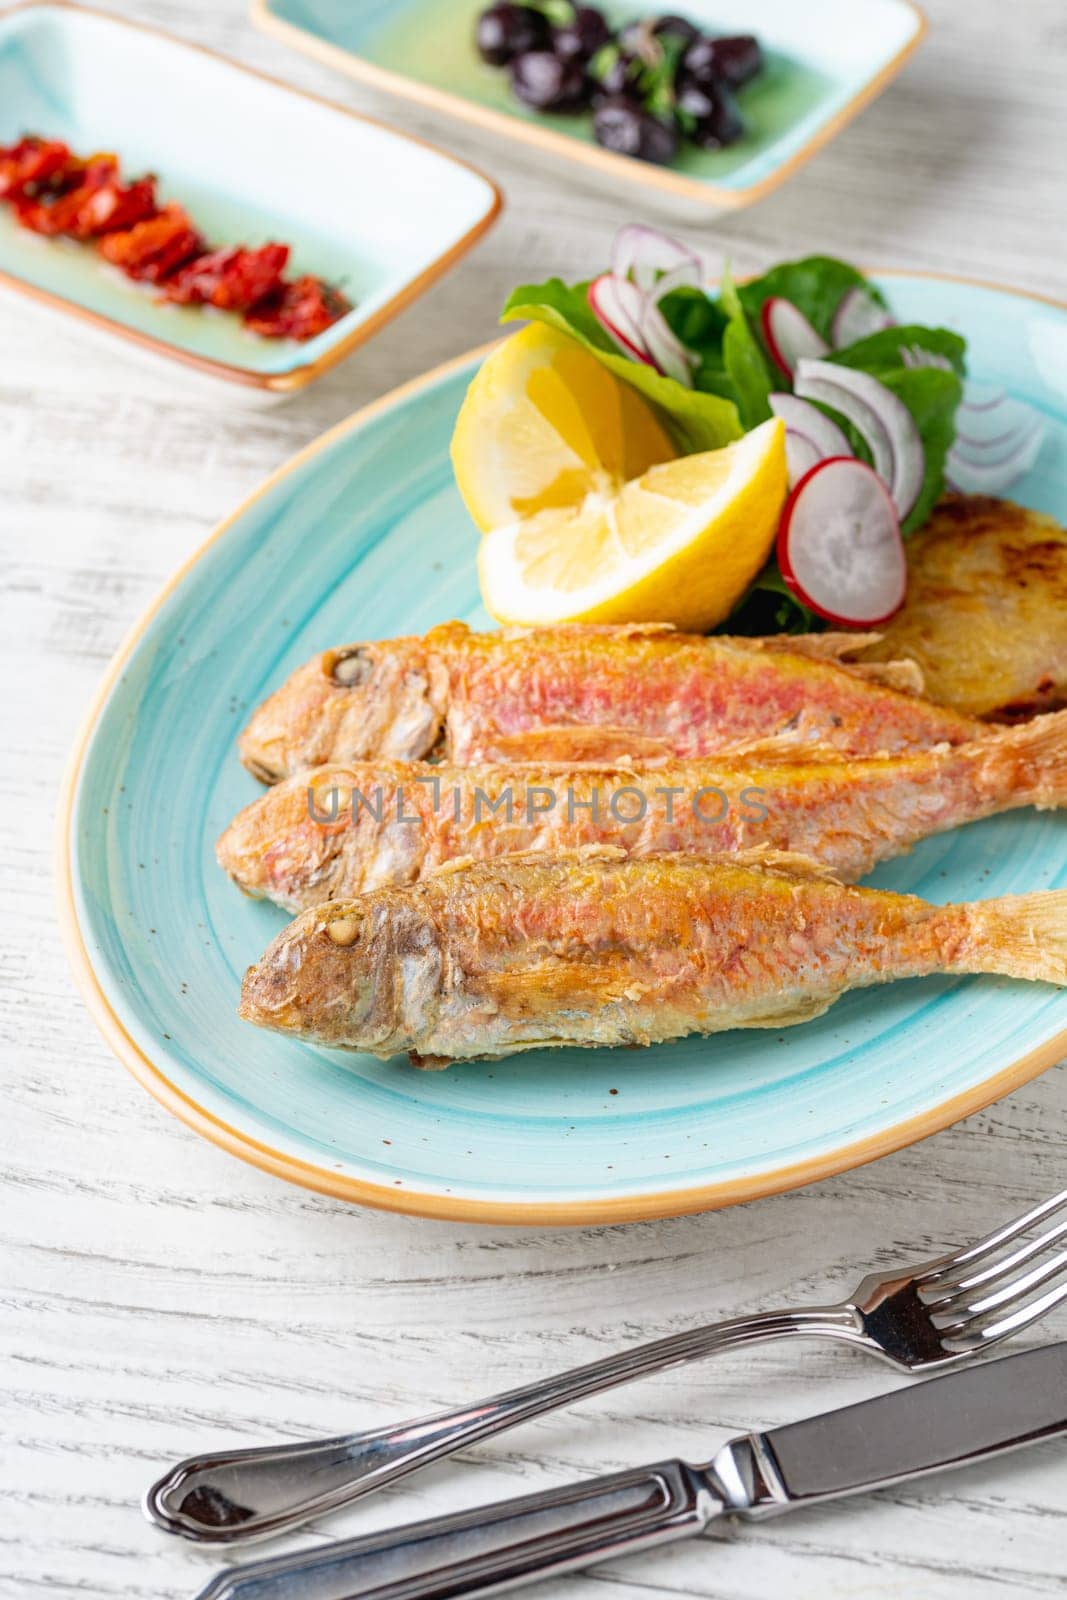 Delicious grilled red mullet fish with garnishes like lemon, greens and onions by Sonat